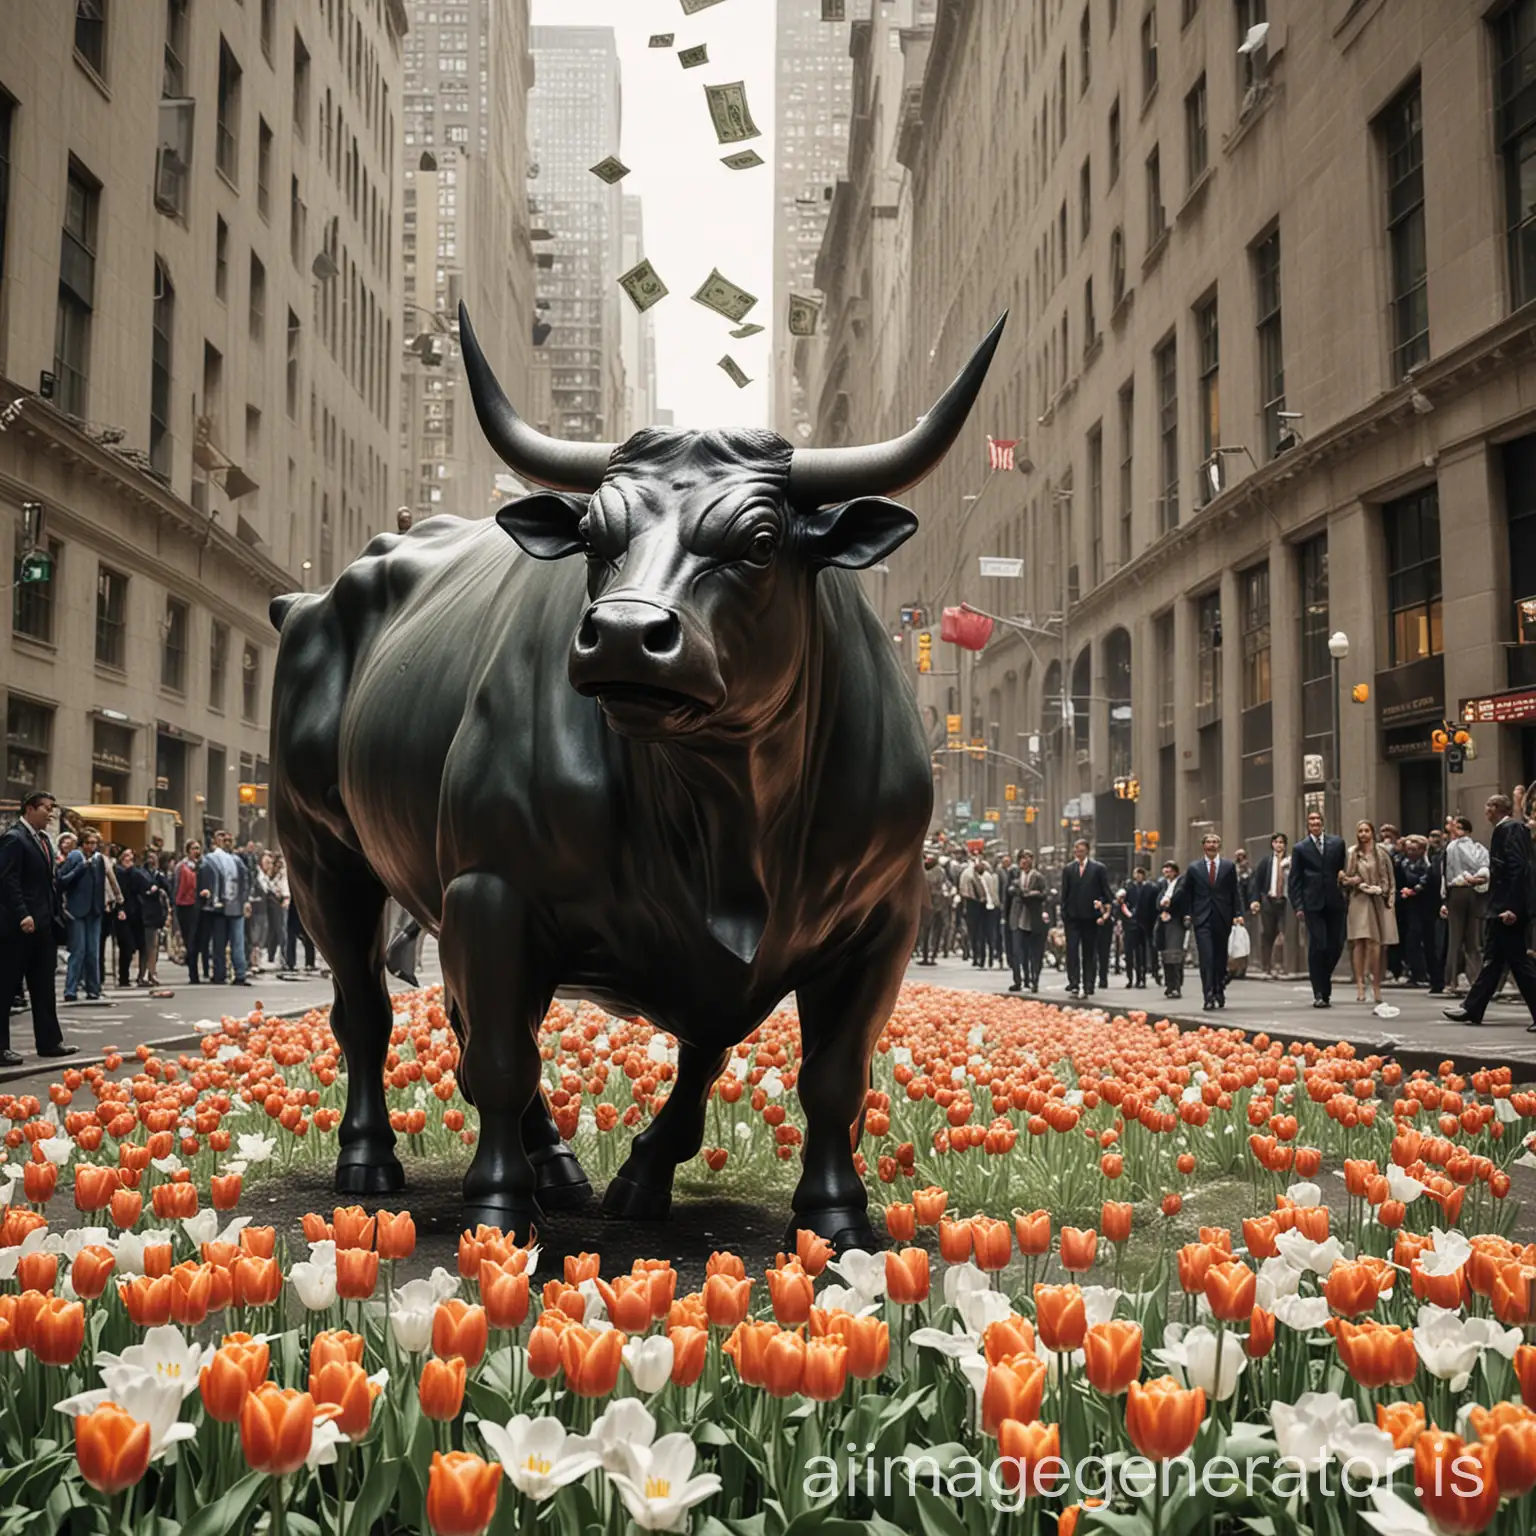 Create an image representing the intersection of greed and uncertainty in Wall Street, New York. Imagine a surreal scene with elements of capitalism, such as the Charging Bull statue and currency, juxtaposed with symbols of fragility and speculation, like tulips and bursting bubbles. Let the AI interpret these themes in its own unique way, conveying the complexities and contradictions of the financial world.